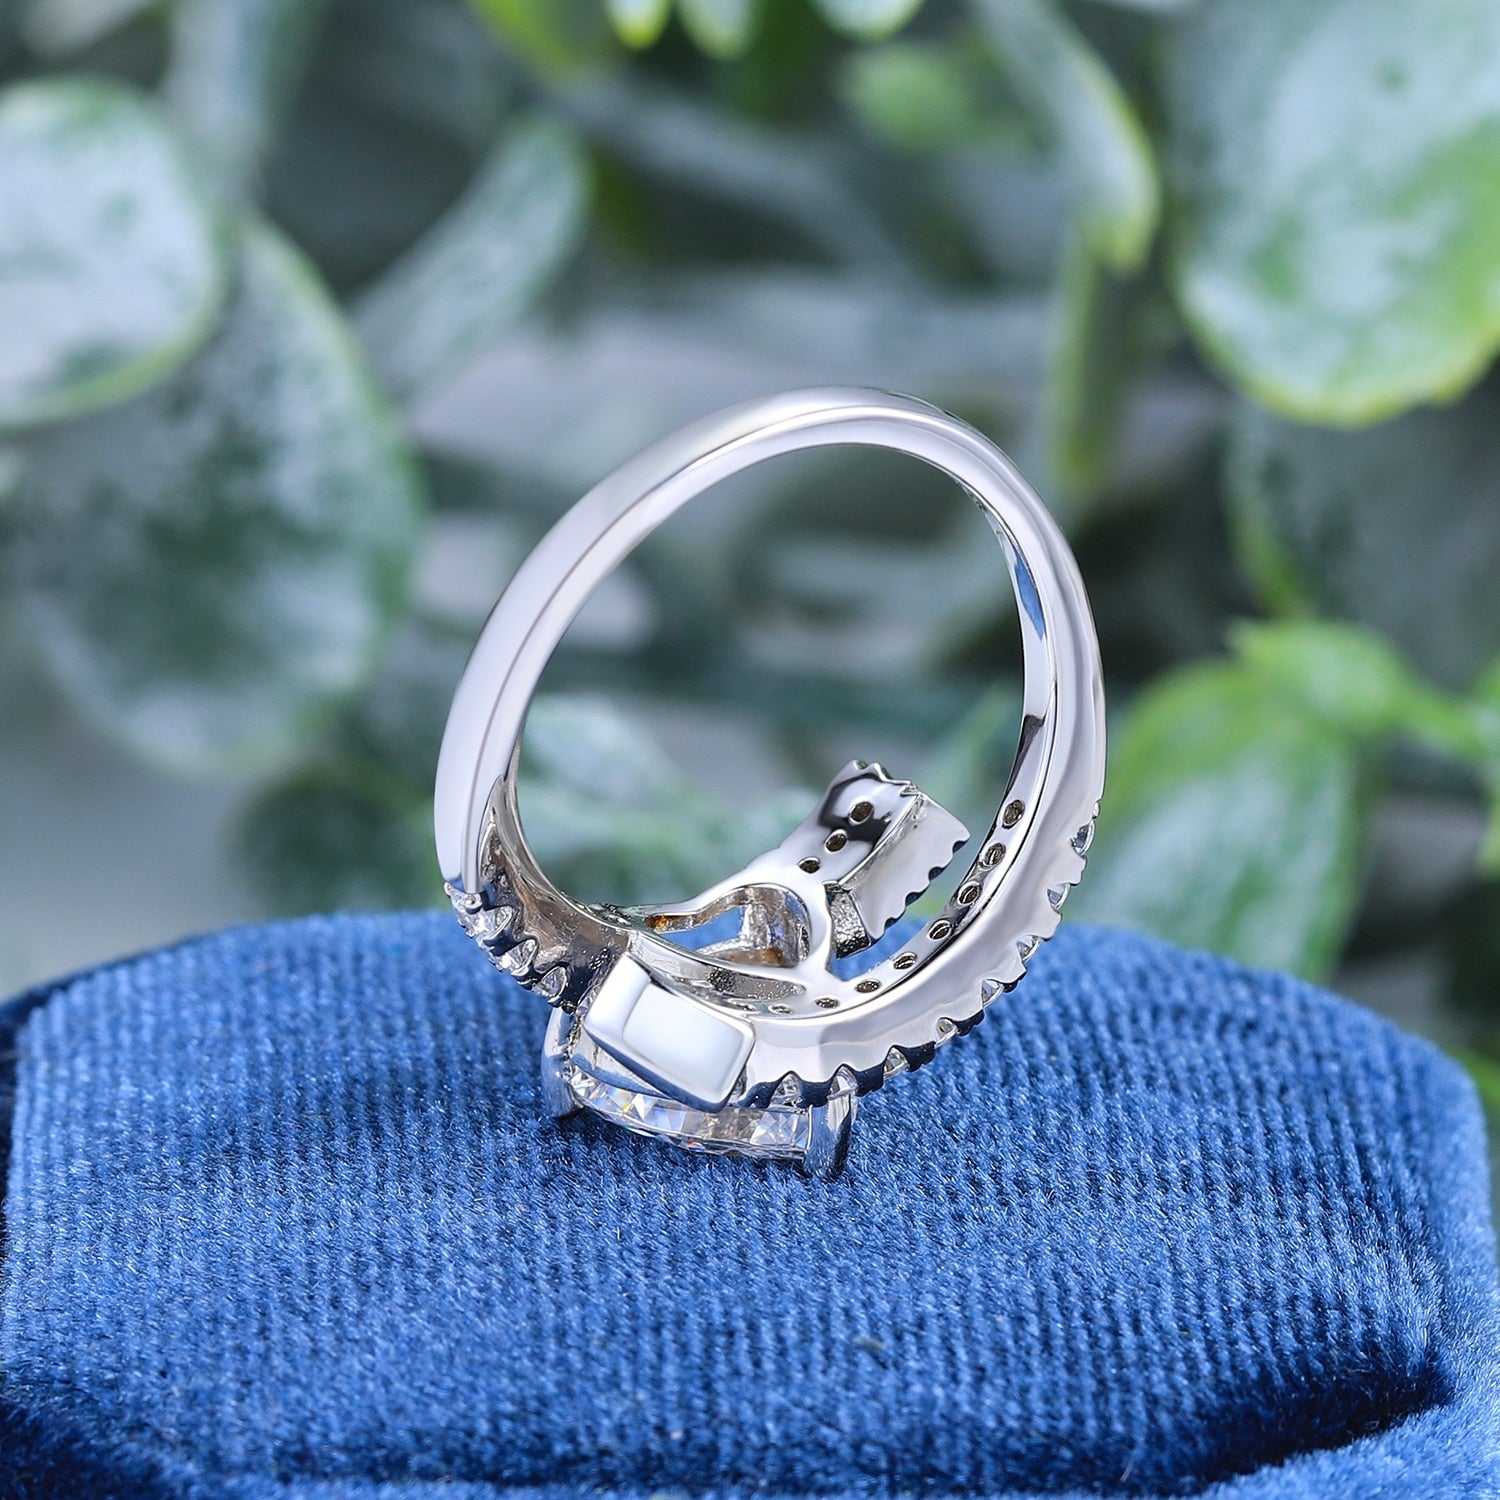 A silver wrap around bypass style ring resembling a pave studded arrow, set with a 4CT heart cut moissanite.